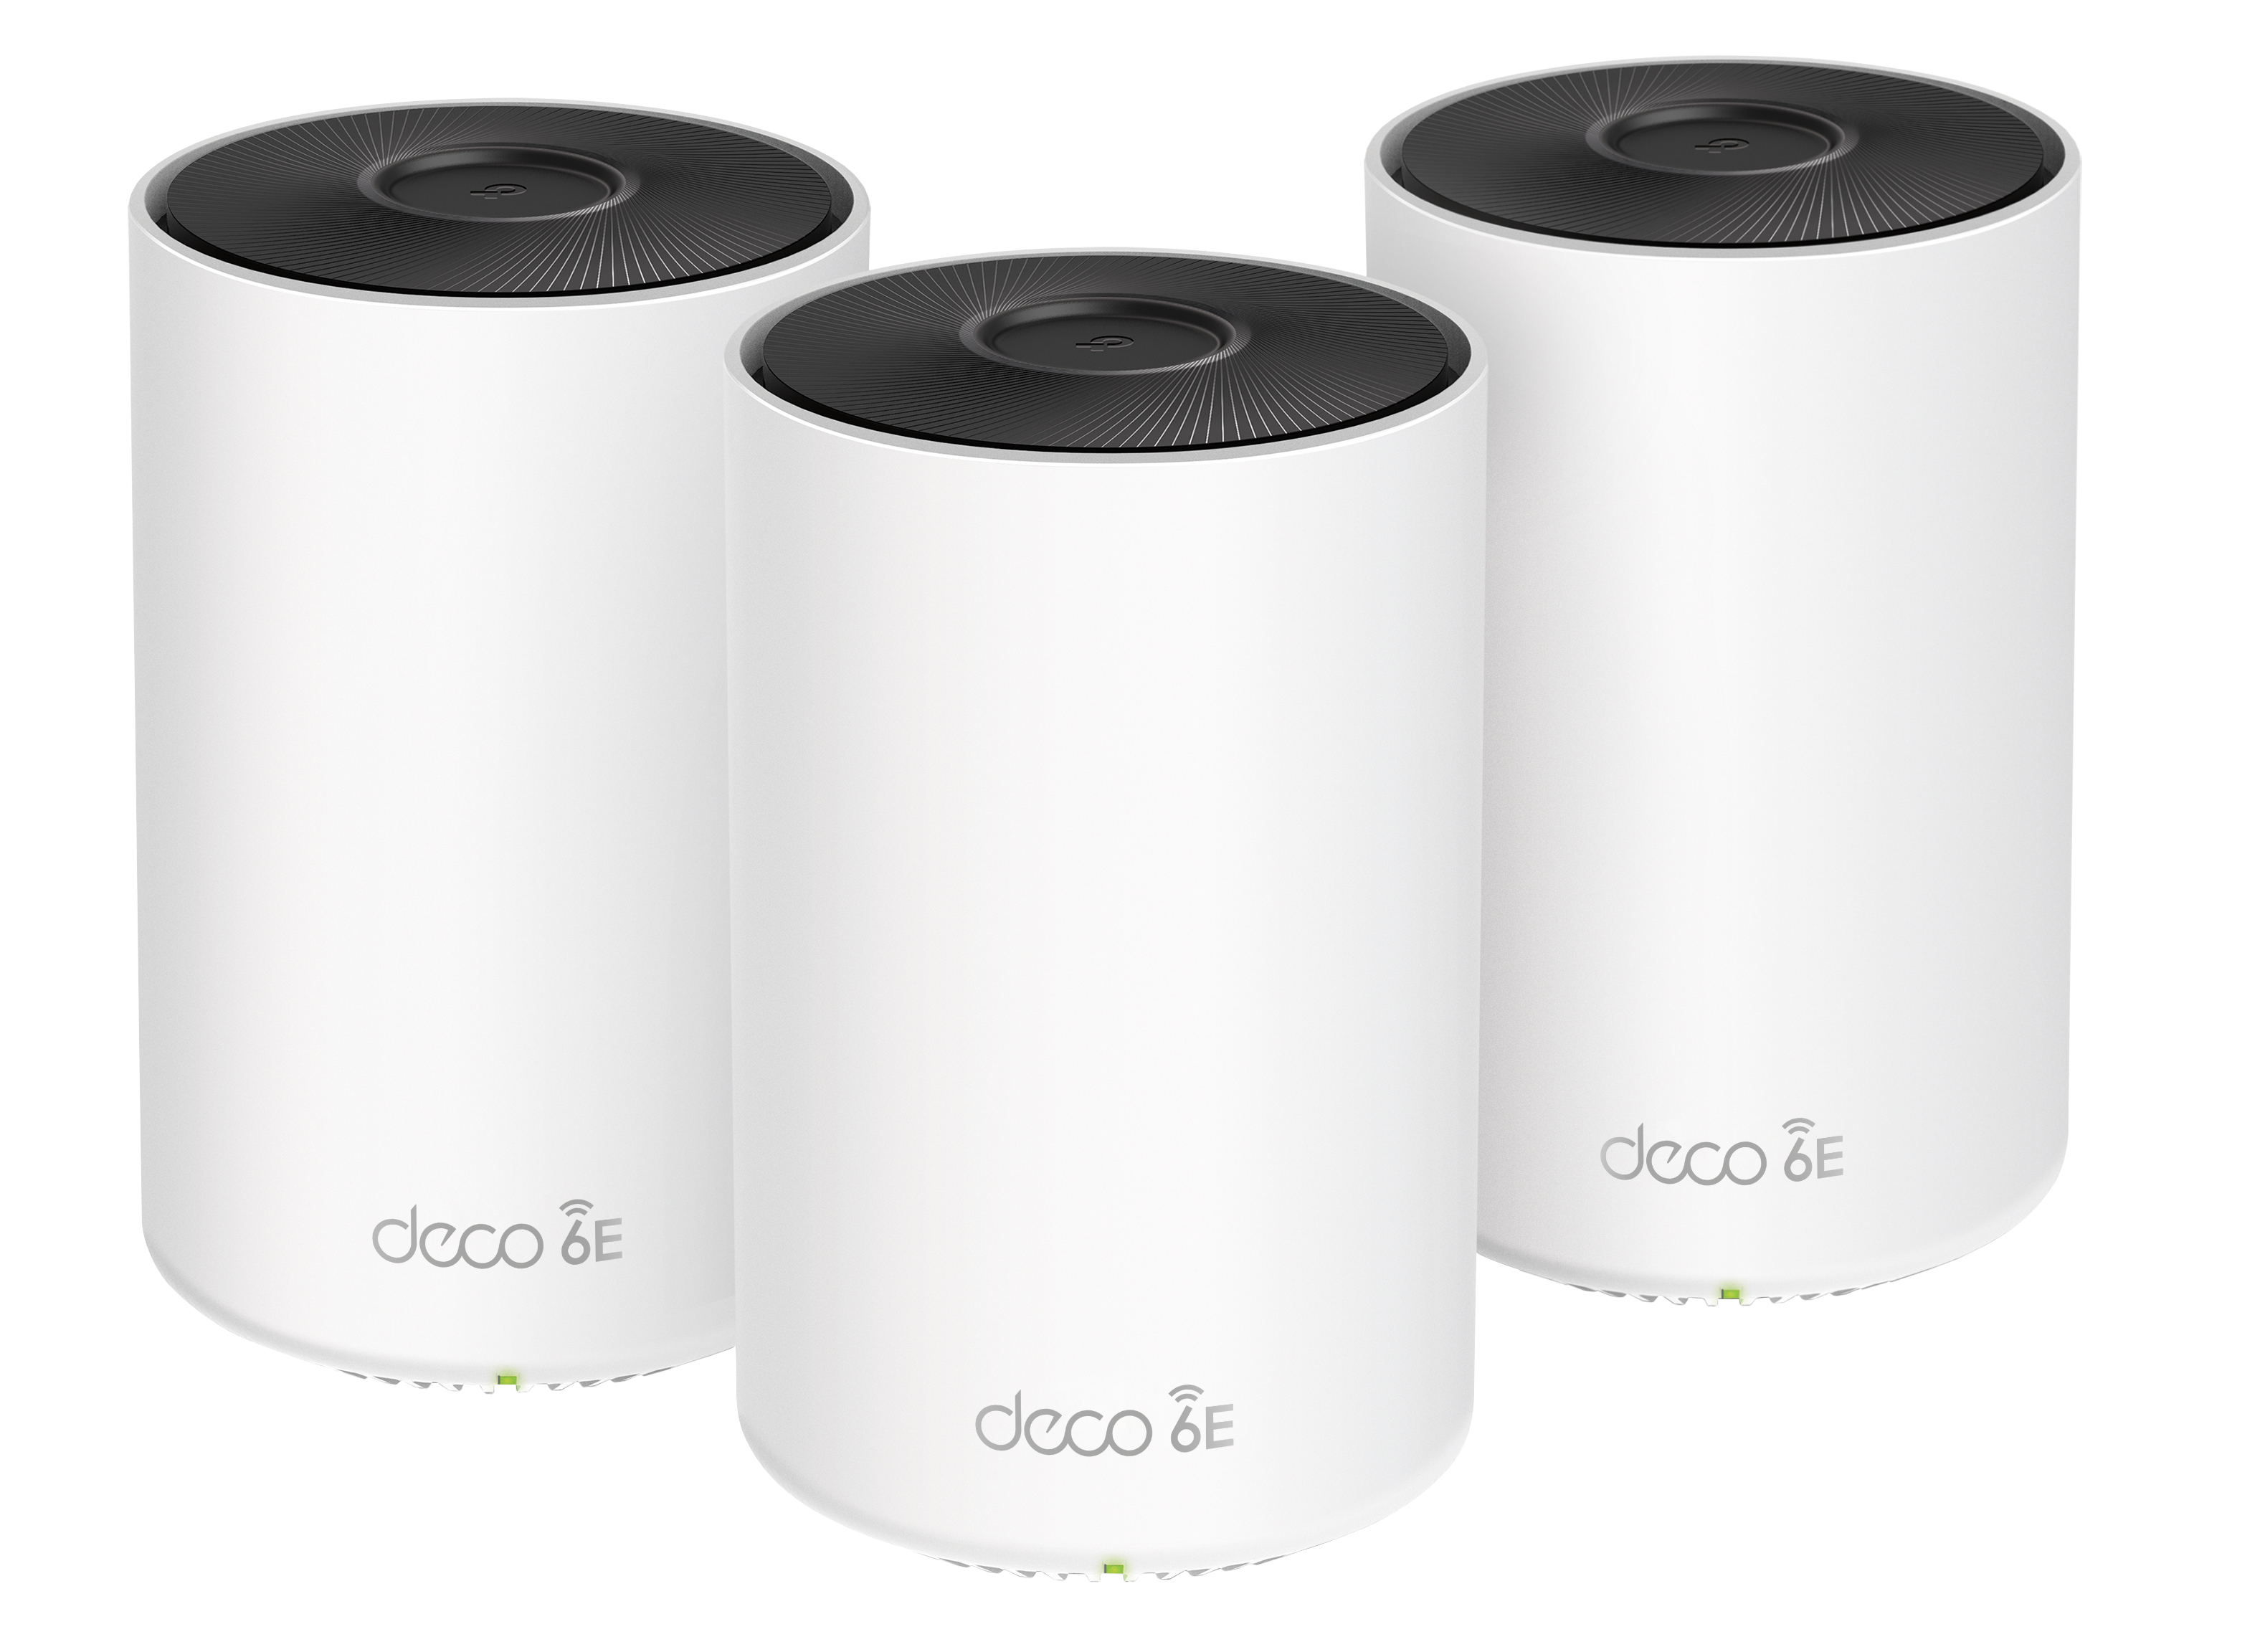 basketbal Verovering muur TP-Link Deco AXE5300 Wi-Fi 6E (3-Pack) Wireless Router Review - Consumer  Reports